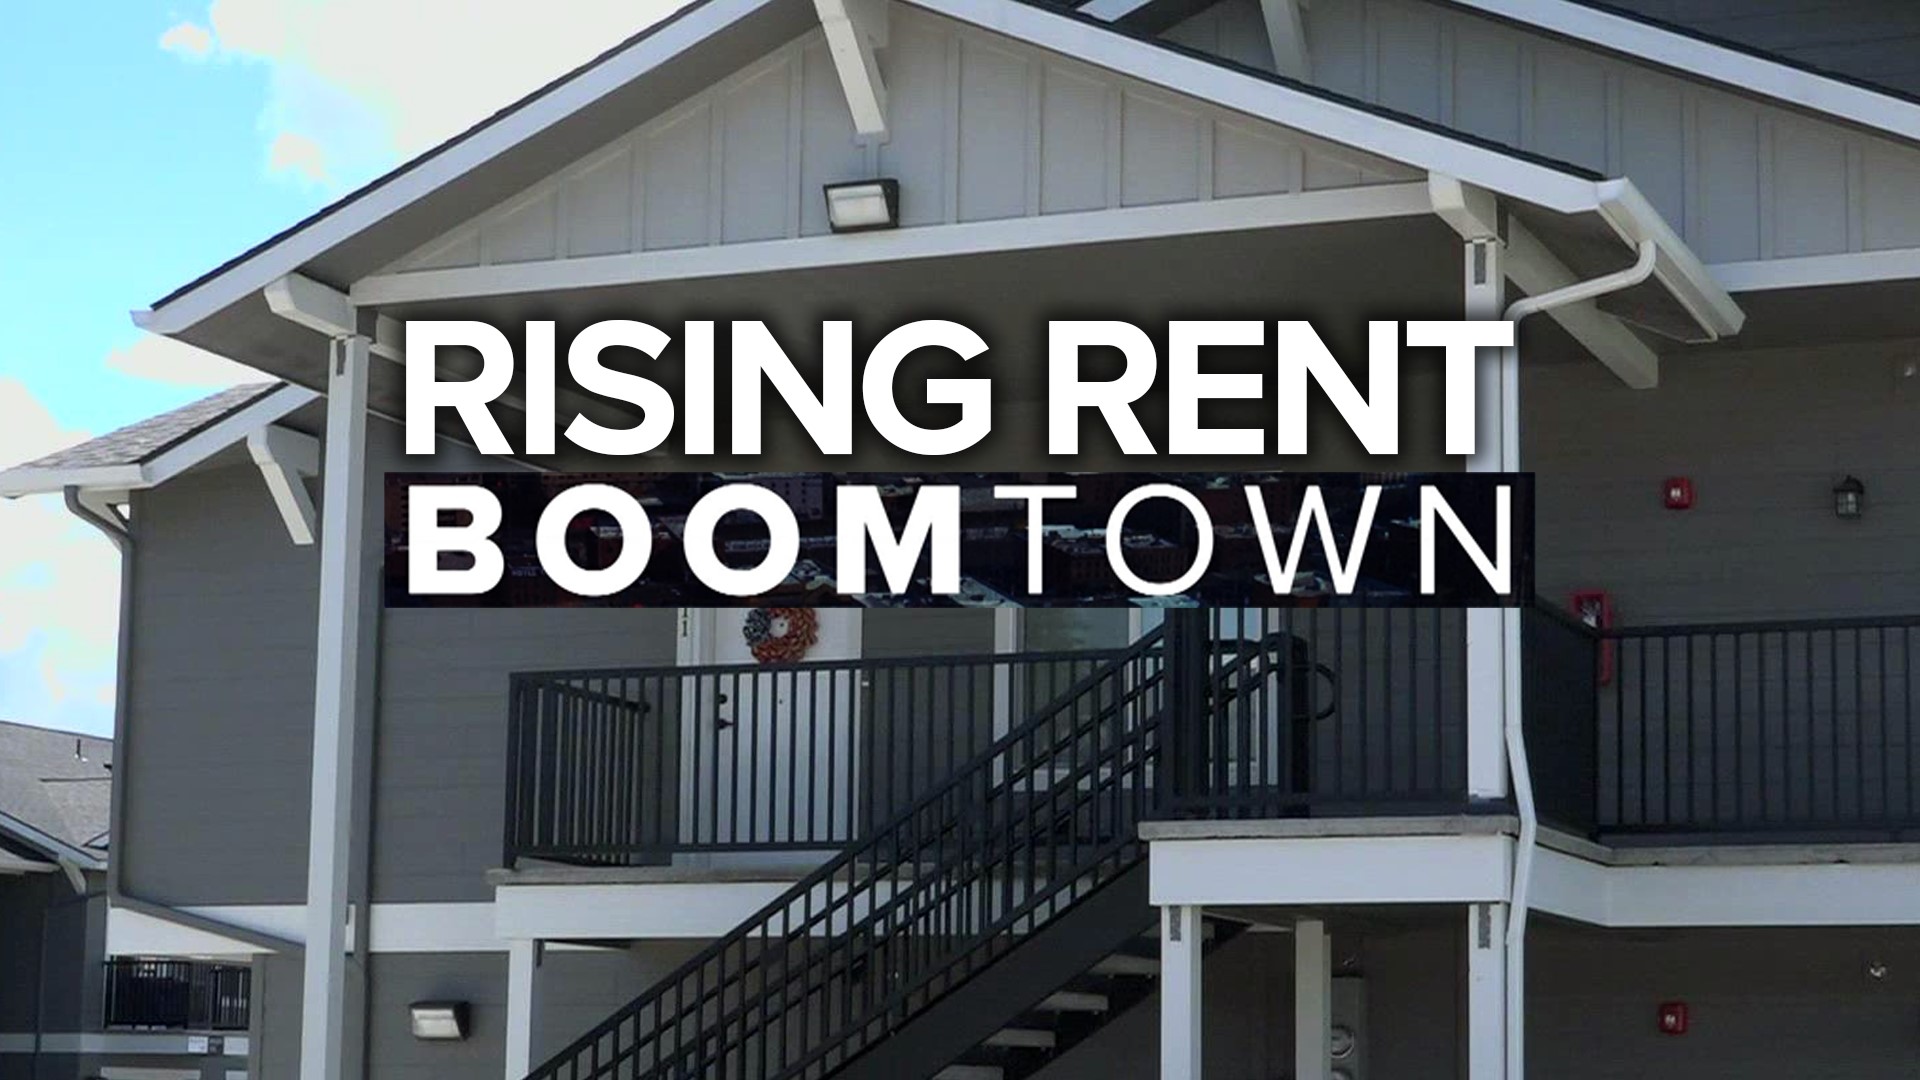 The average rent in Kootenai County in December 2021 was $1400.